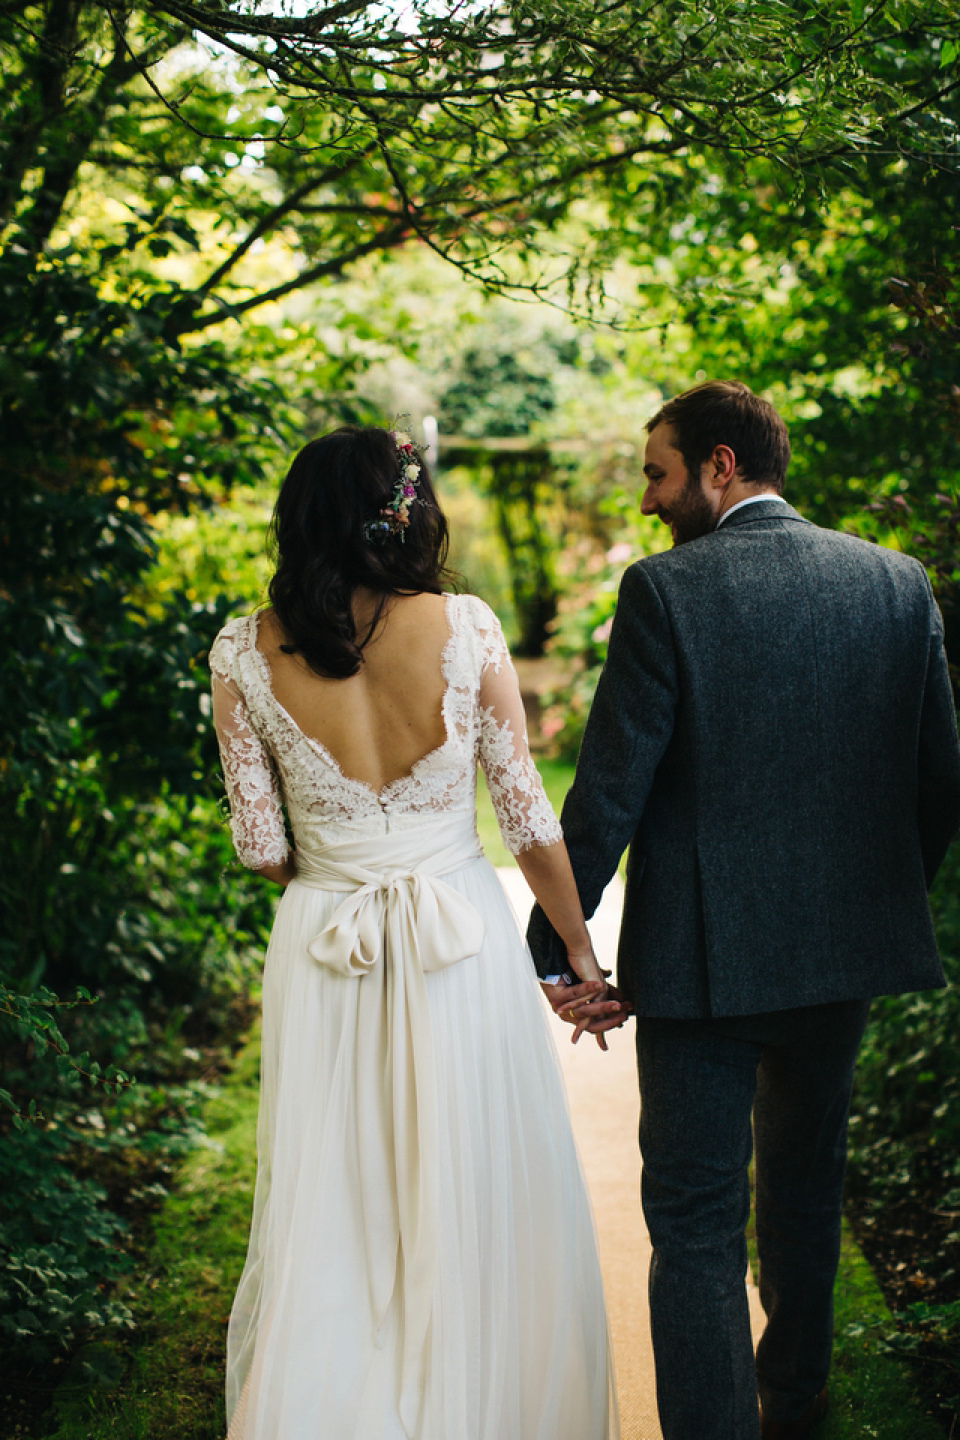 Leila wore a bespoke gown by dressmaker Dana Bolton for her rustic, homespun Autumn barn wedding. Photography by Richard Skins.